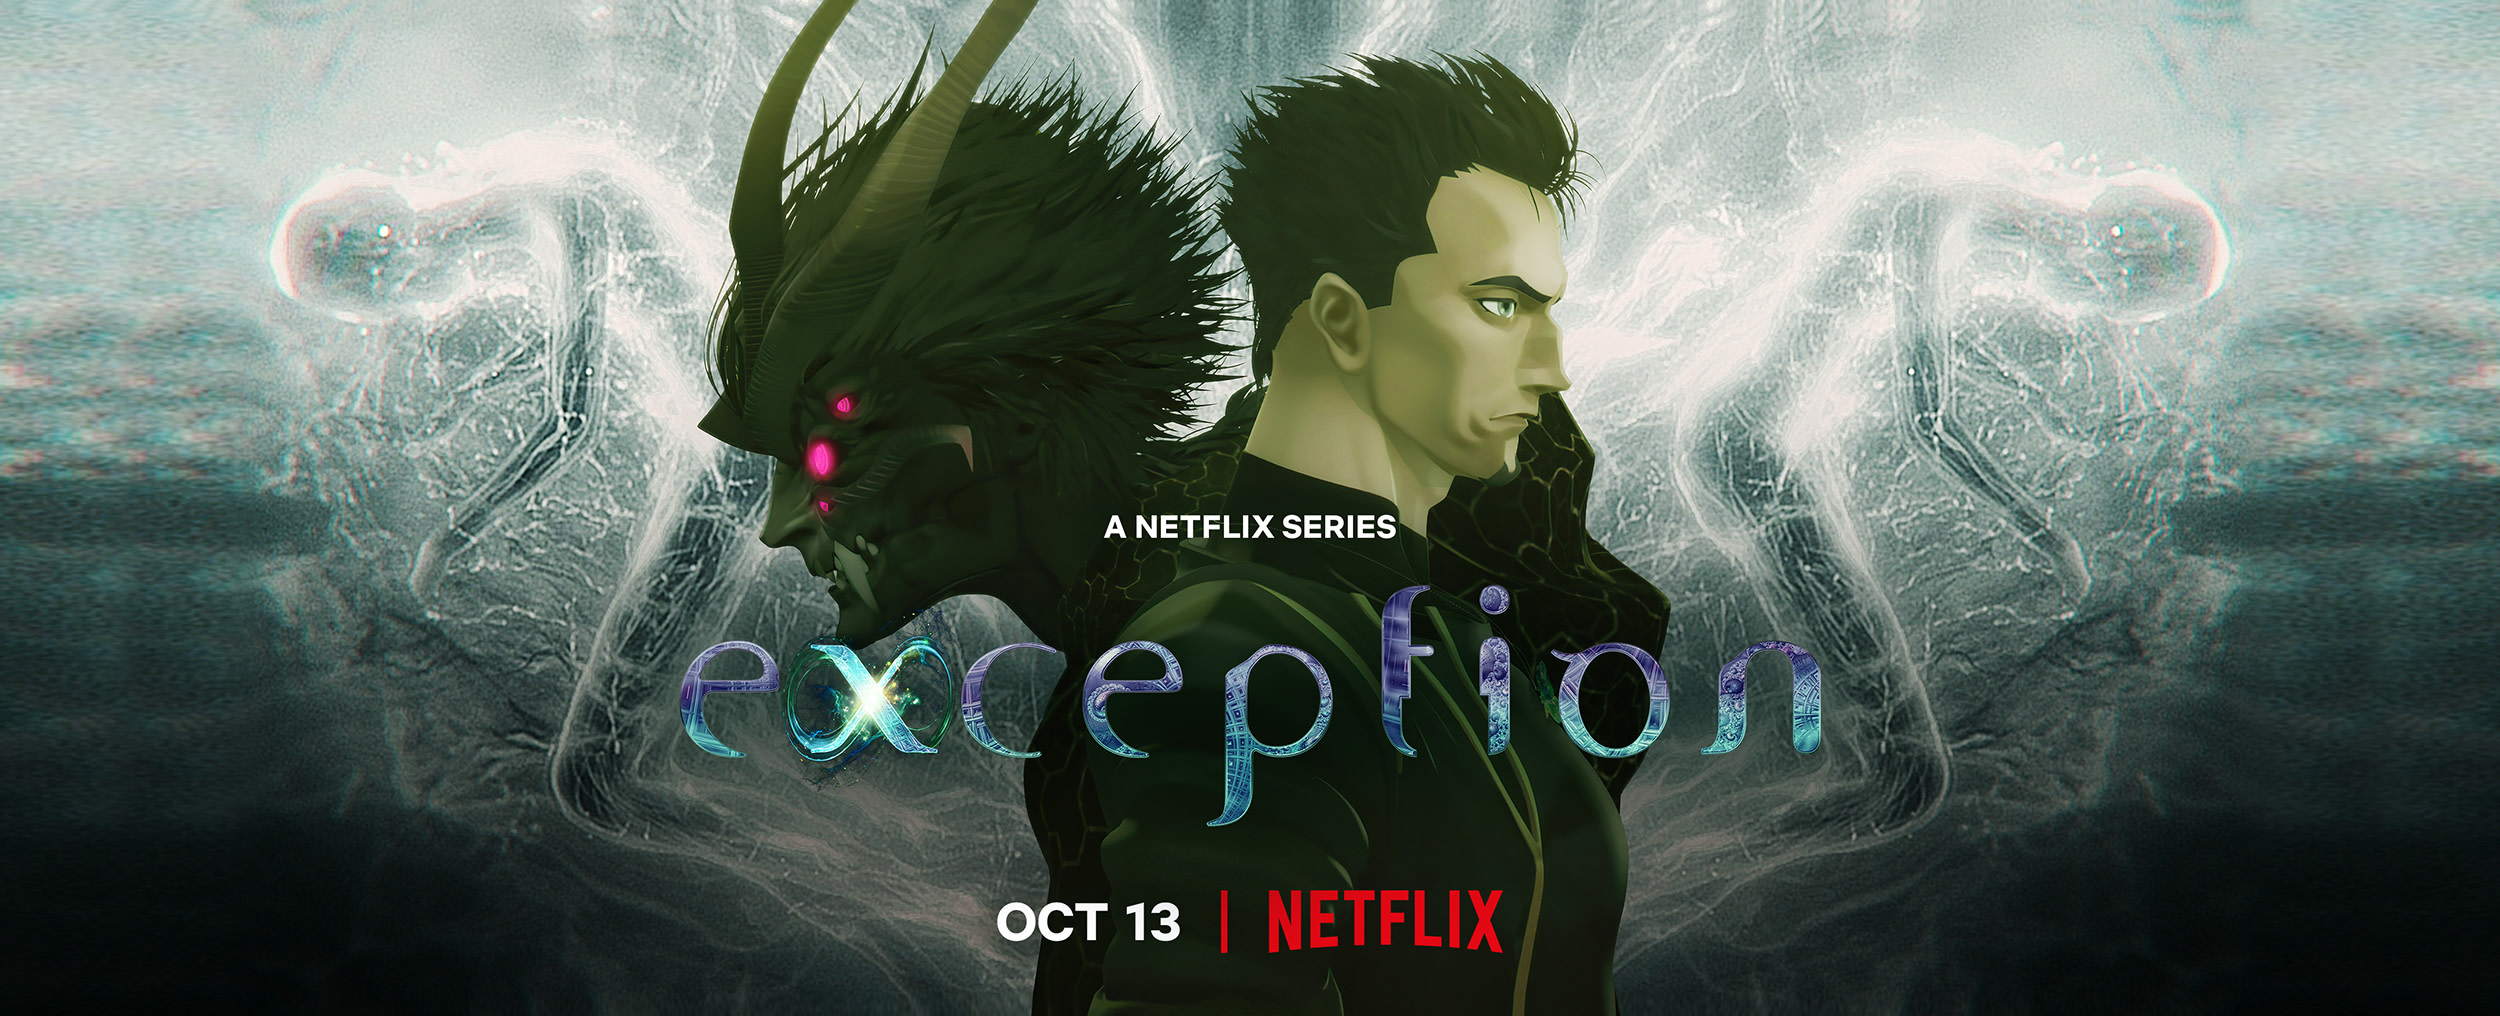 Netflix Announces That Upcoming Anime Series 'Exception' Features